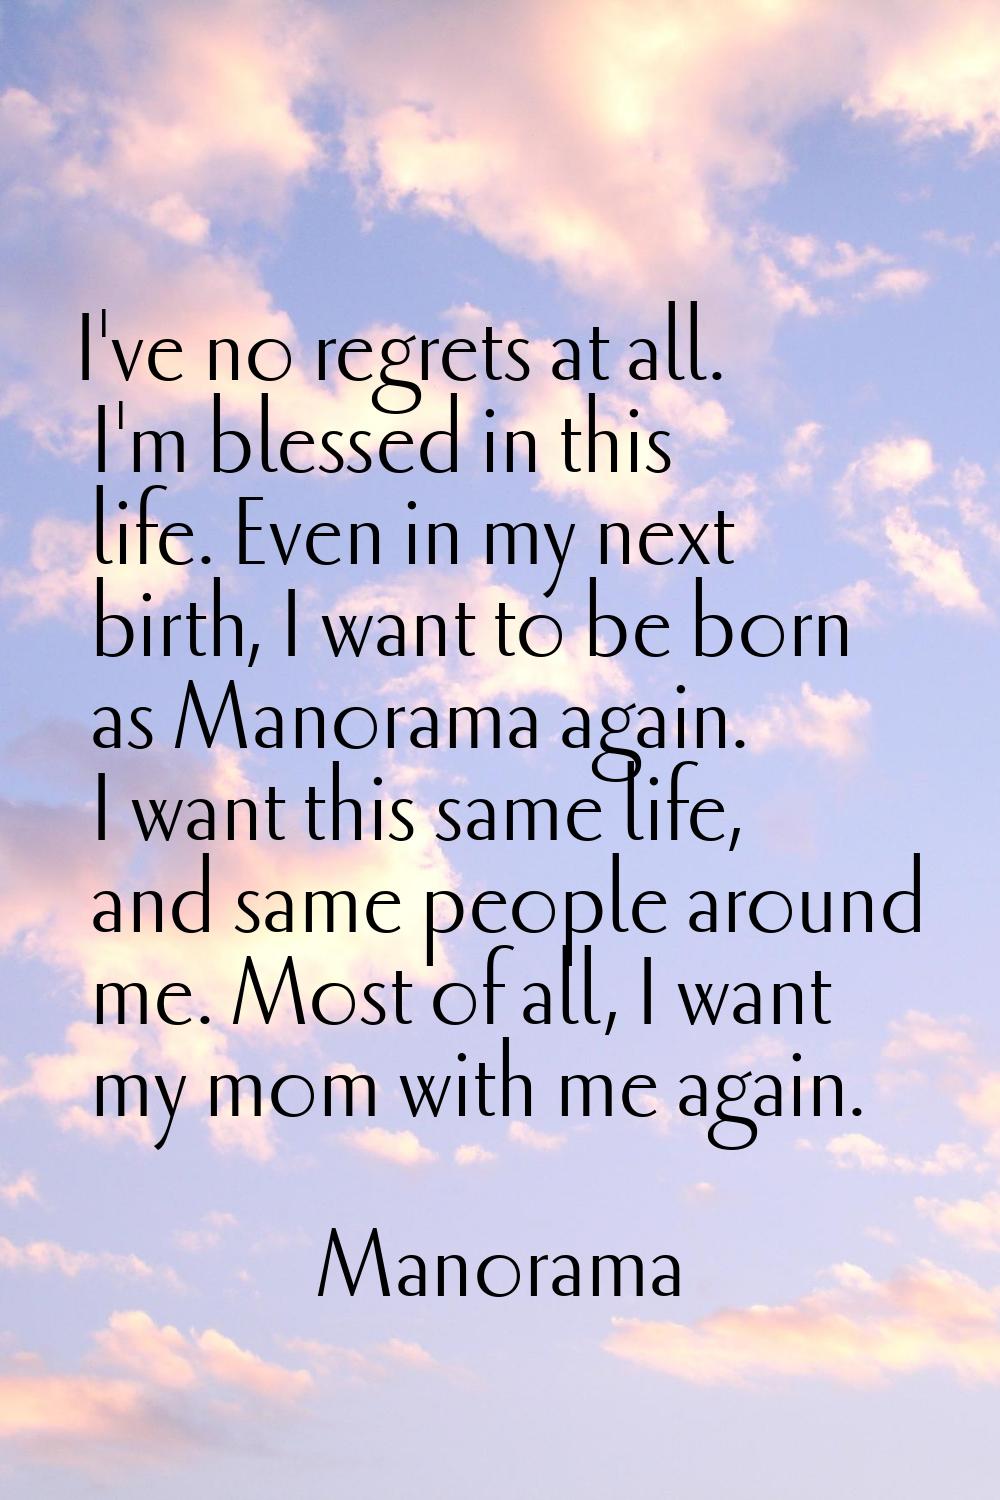 I've no regrets at all. I'm blessed in this life. Even in my next birth, I want to be born as Manor